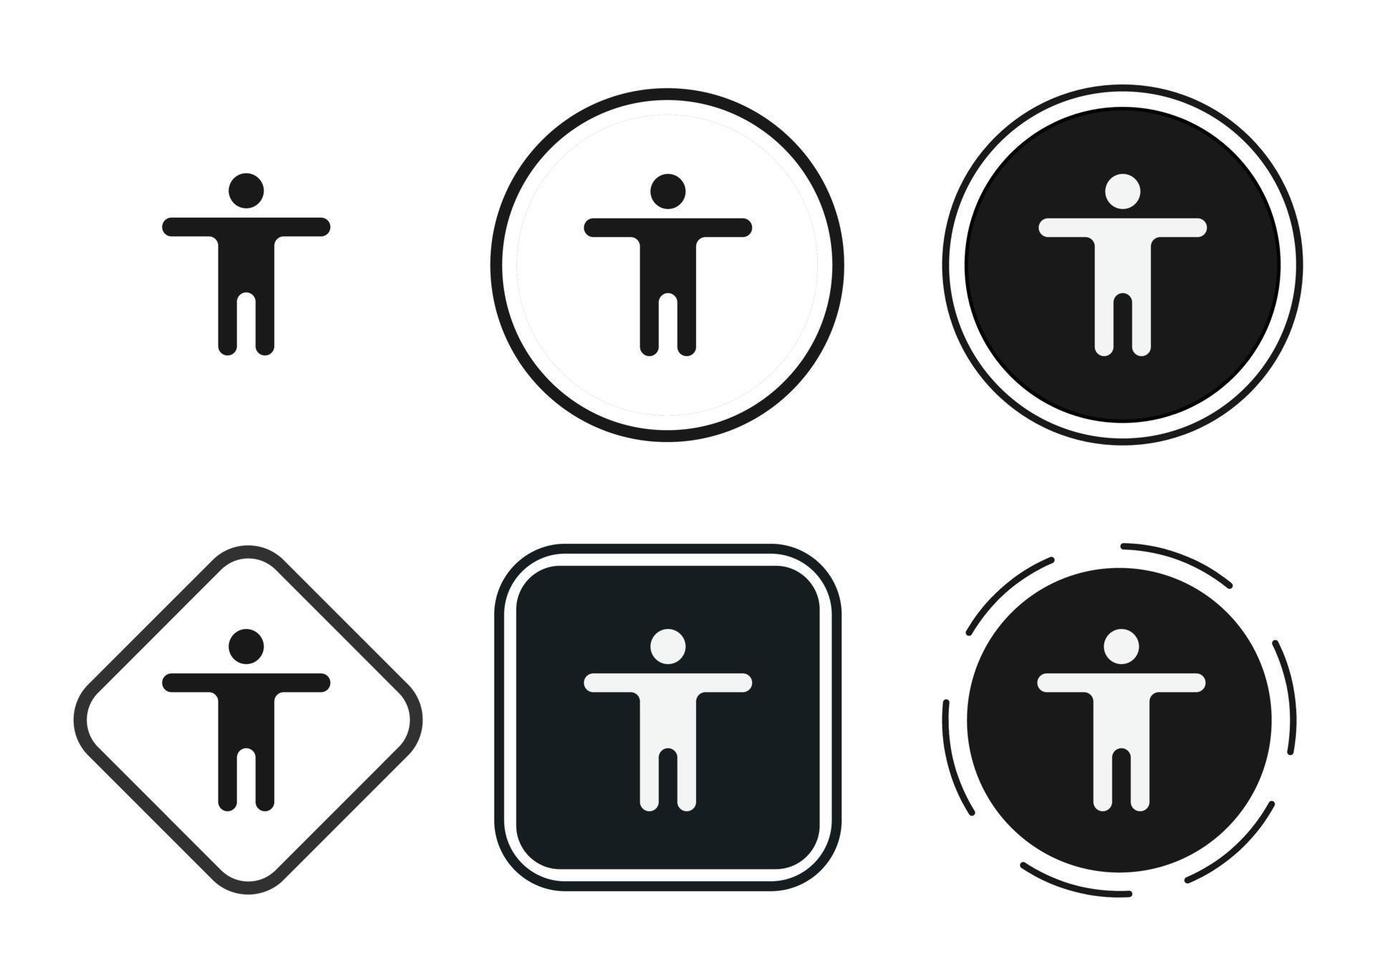 body icon . web icon set . icons collection flat. Simple vector illustration.